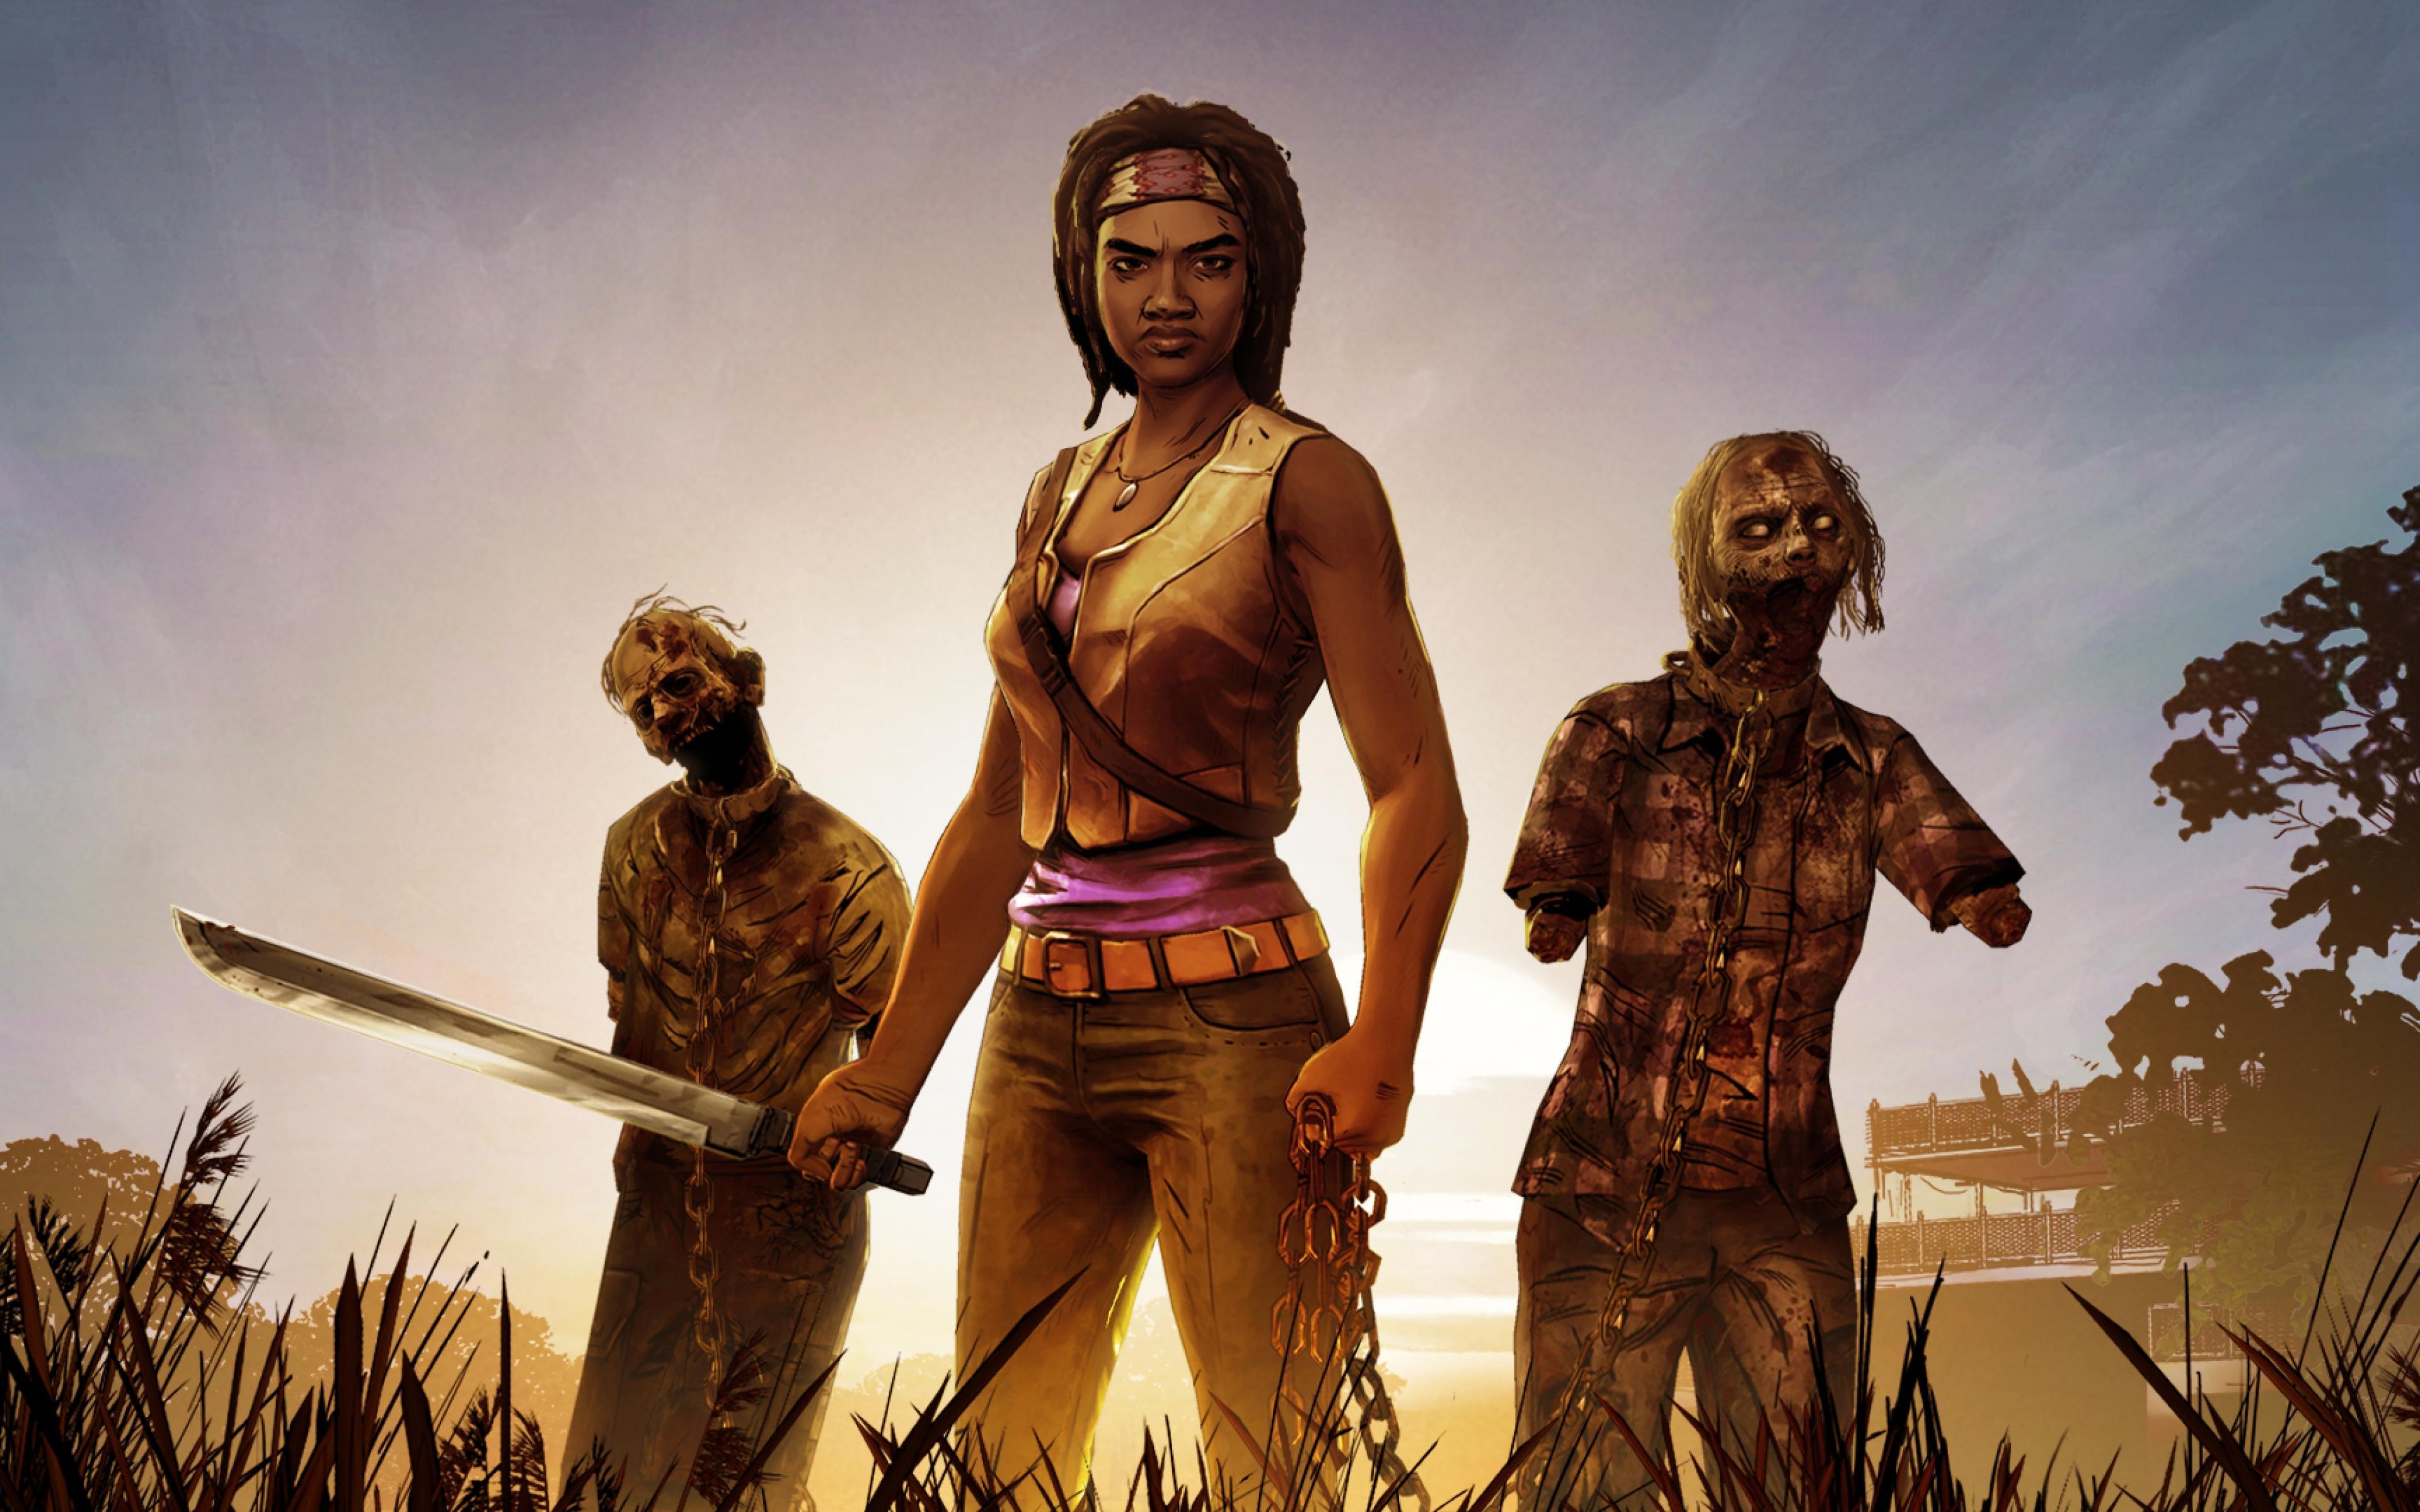 The Walking Dead Michonne Wallpapers Wallpaper Cave Images, Photos, Reviews